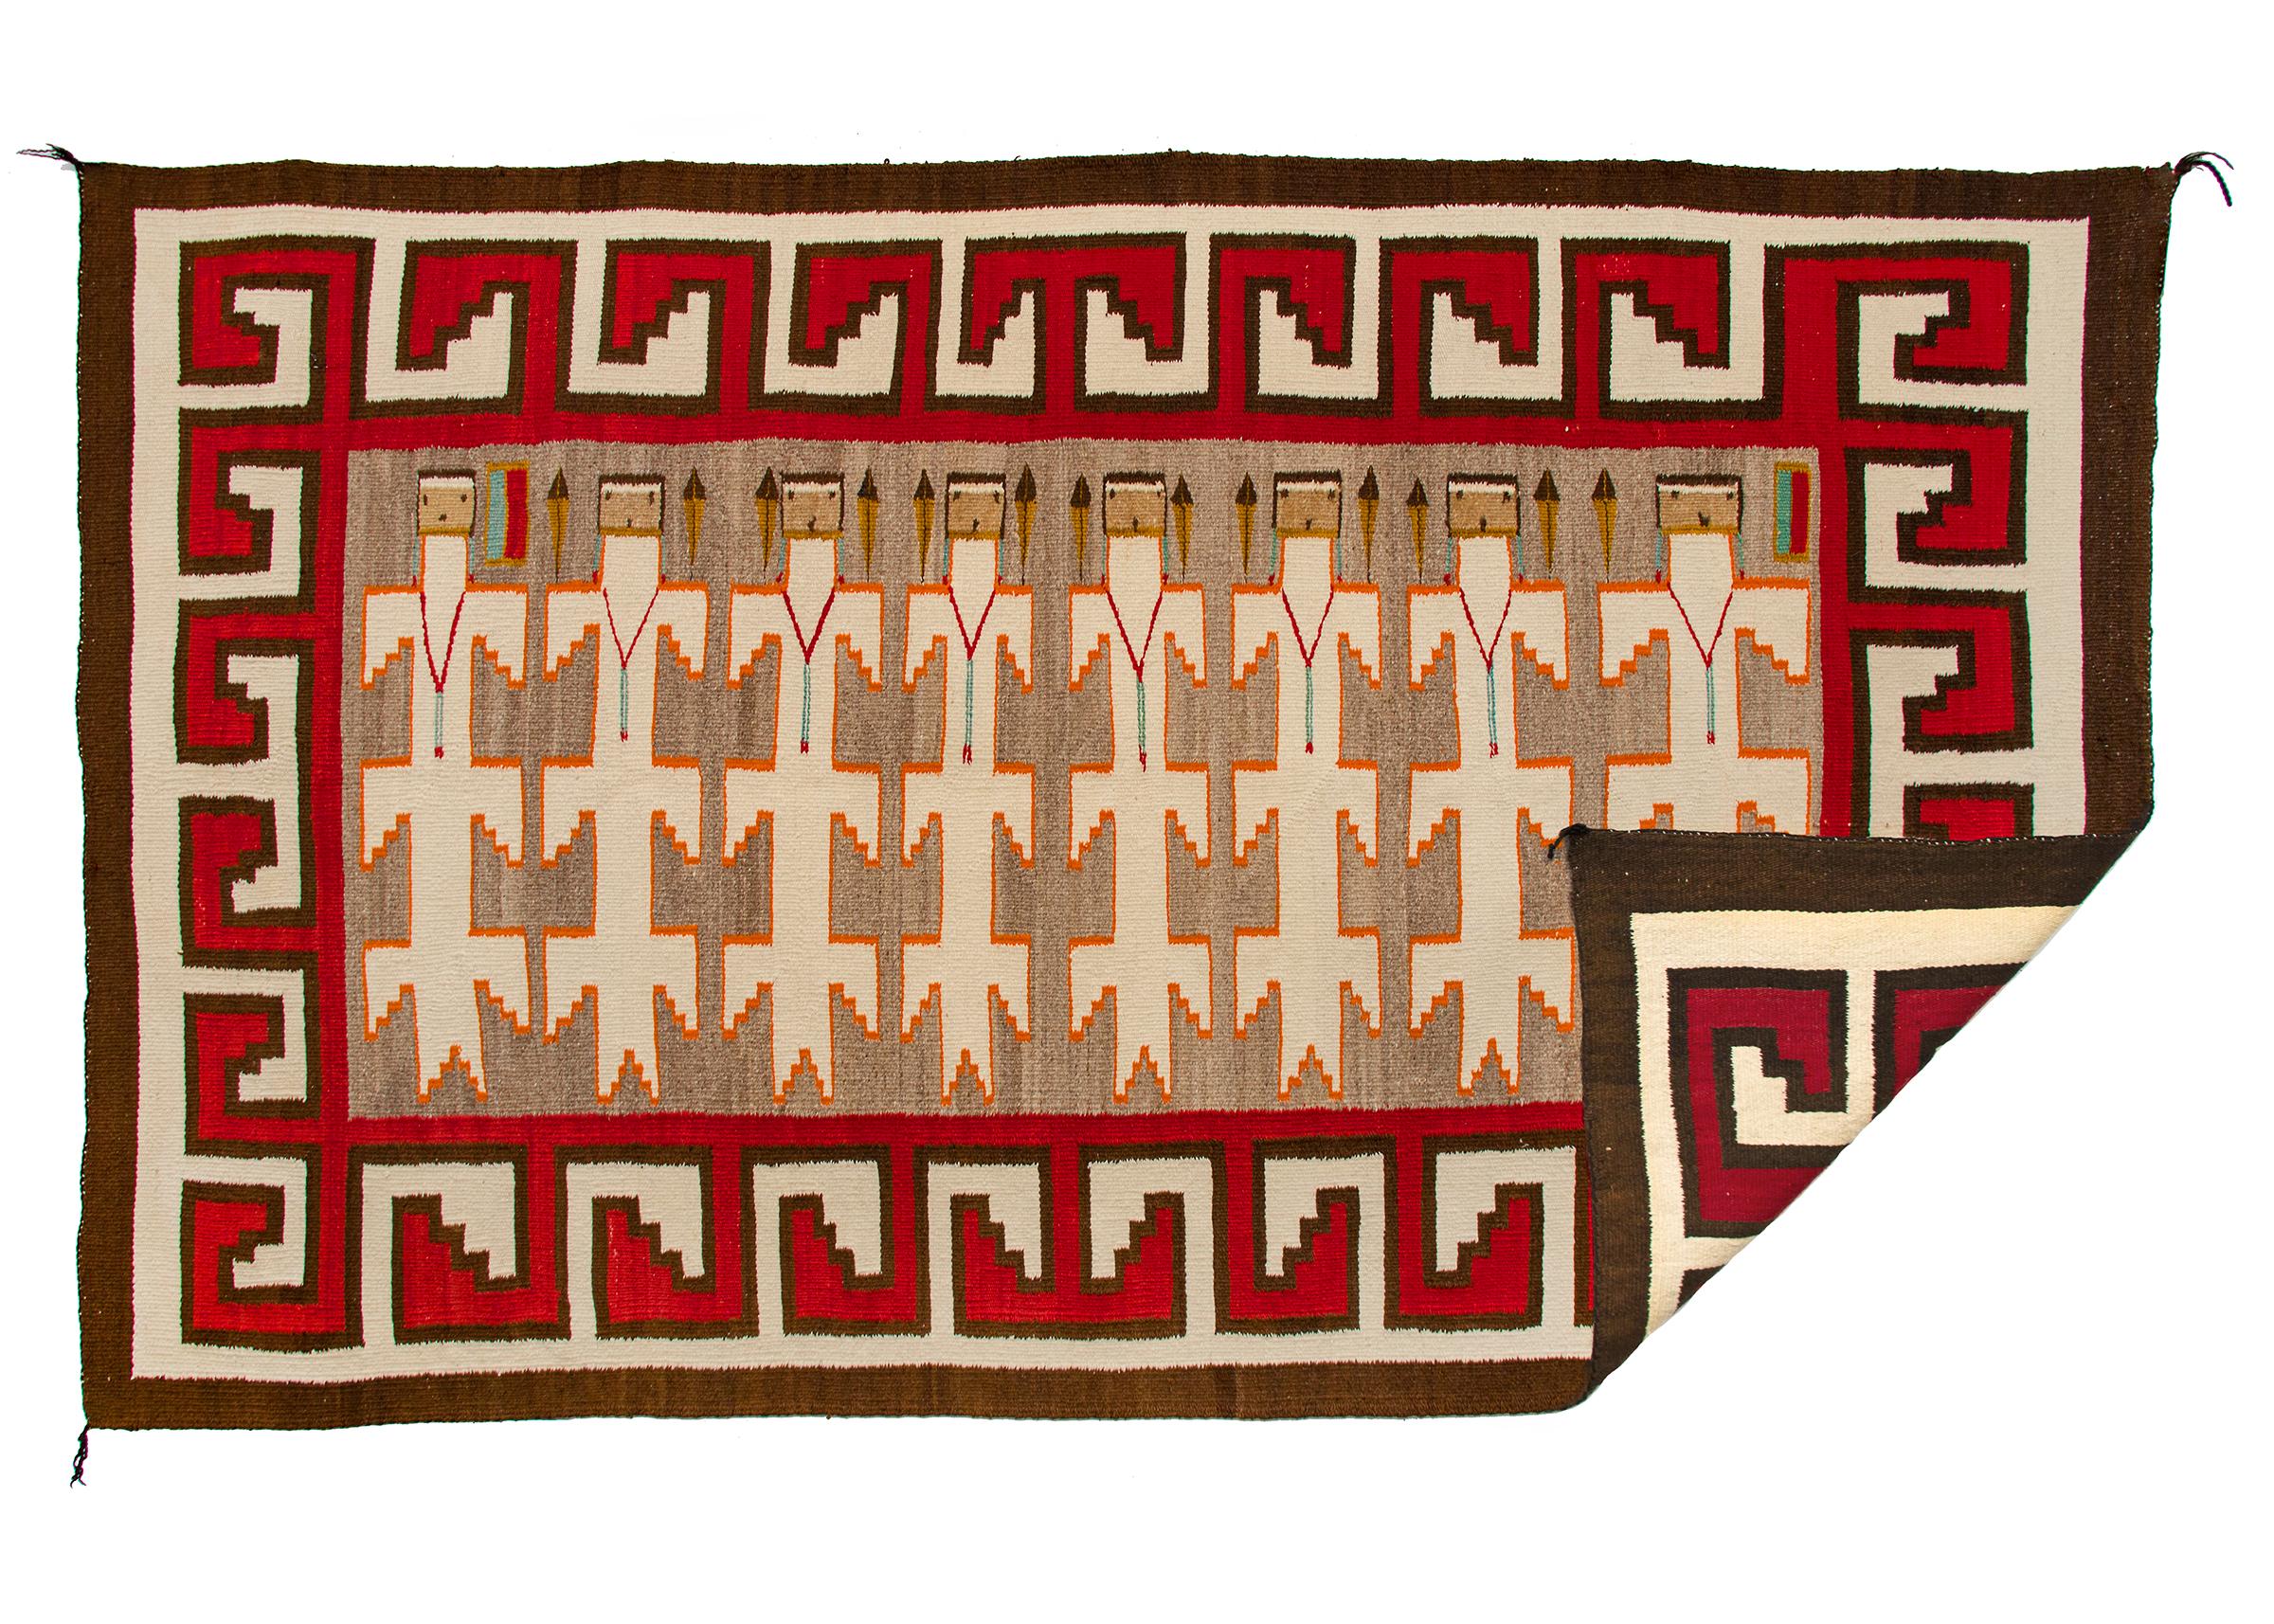 Antique/vintage 1930s Navajo pictorial weaving known as a Yei rug with 8 Yei figures, the Yeibichai or Talking Gods, are surrounded by a hooked border woven of native wool that was hand-carded, hand-spun and hand-woven by a Navajo weaver in colors